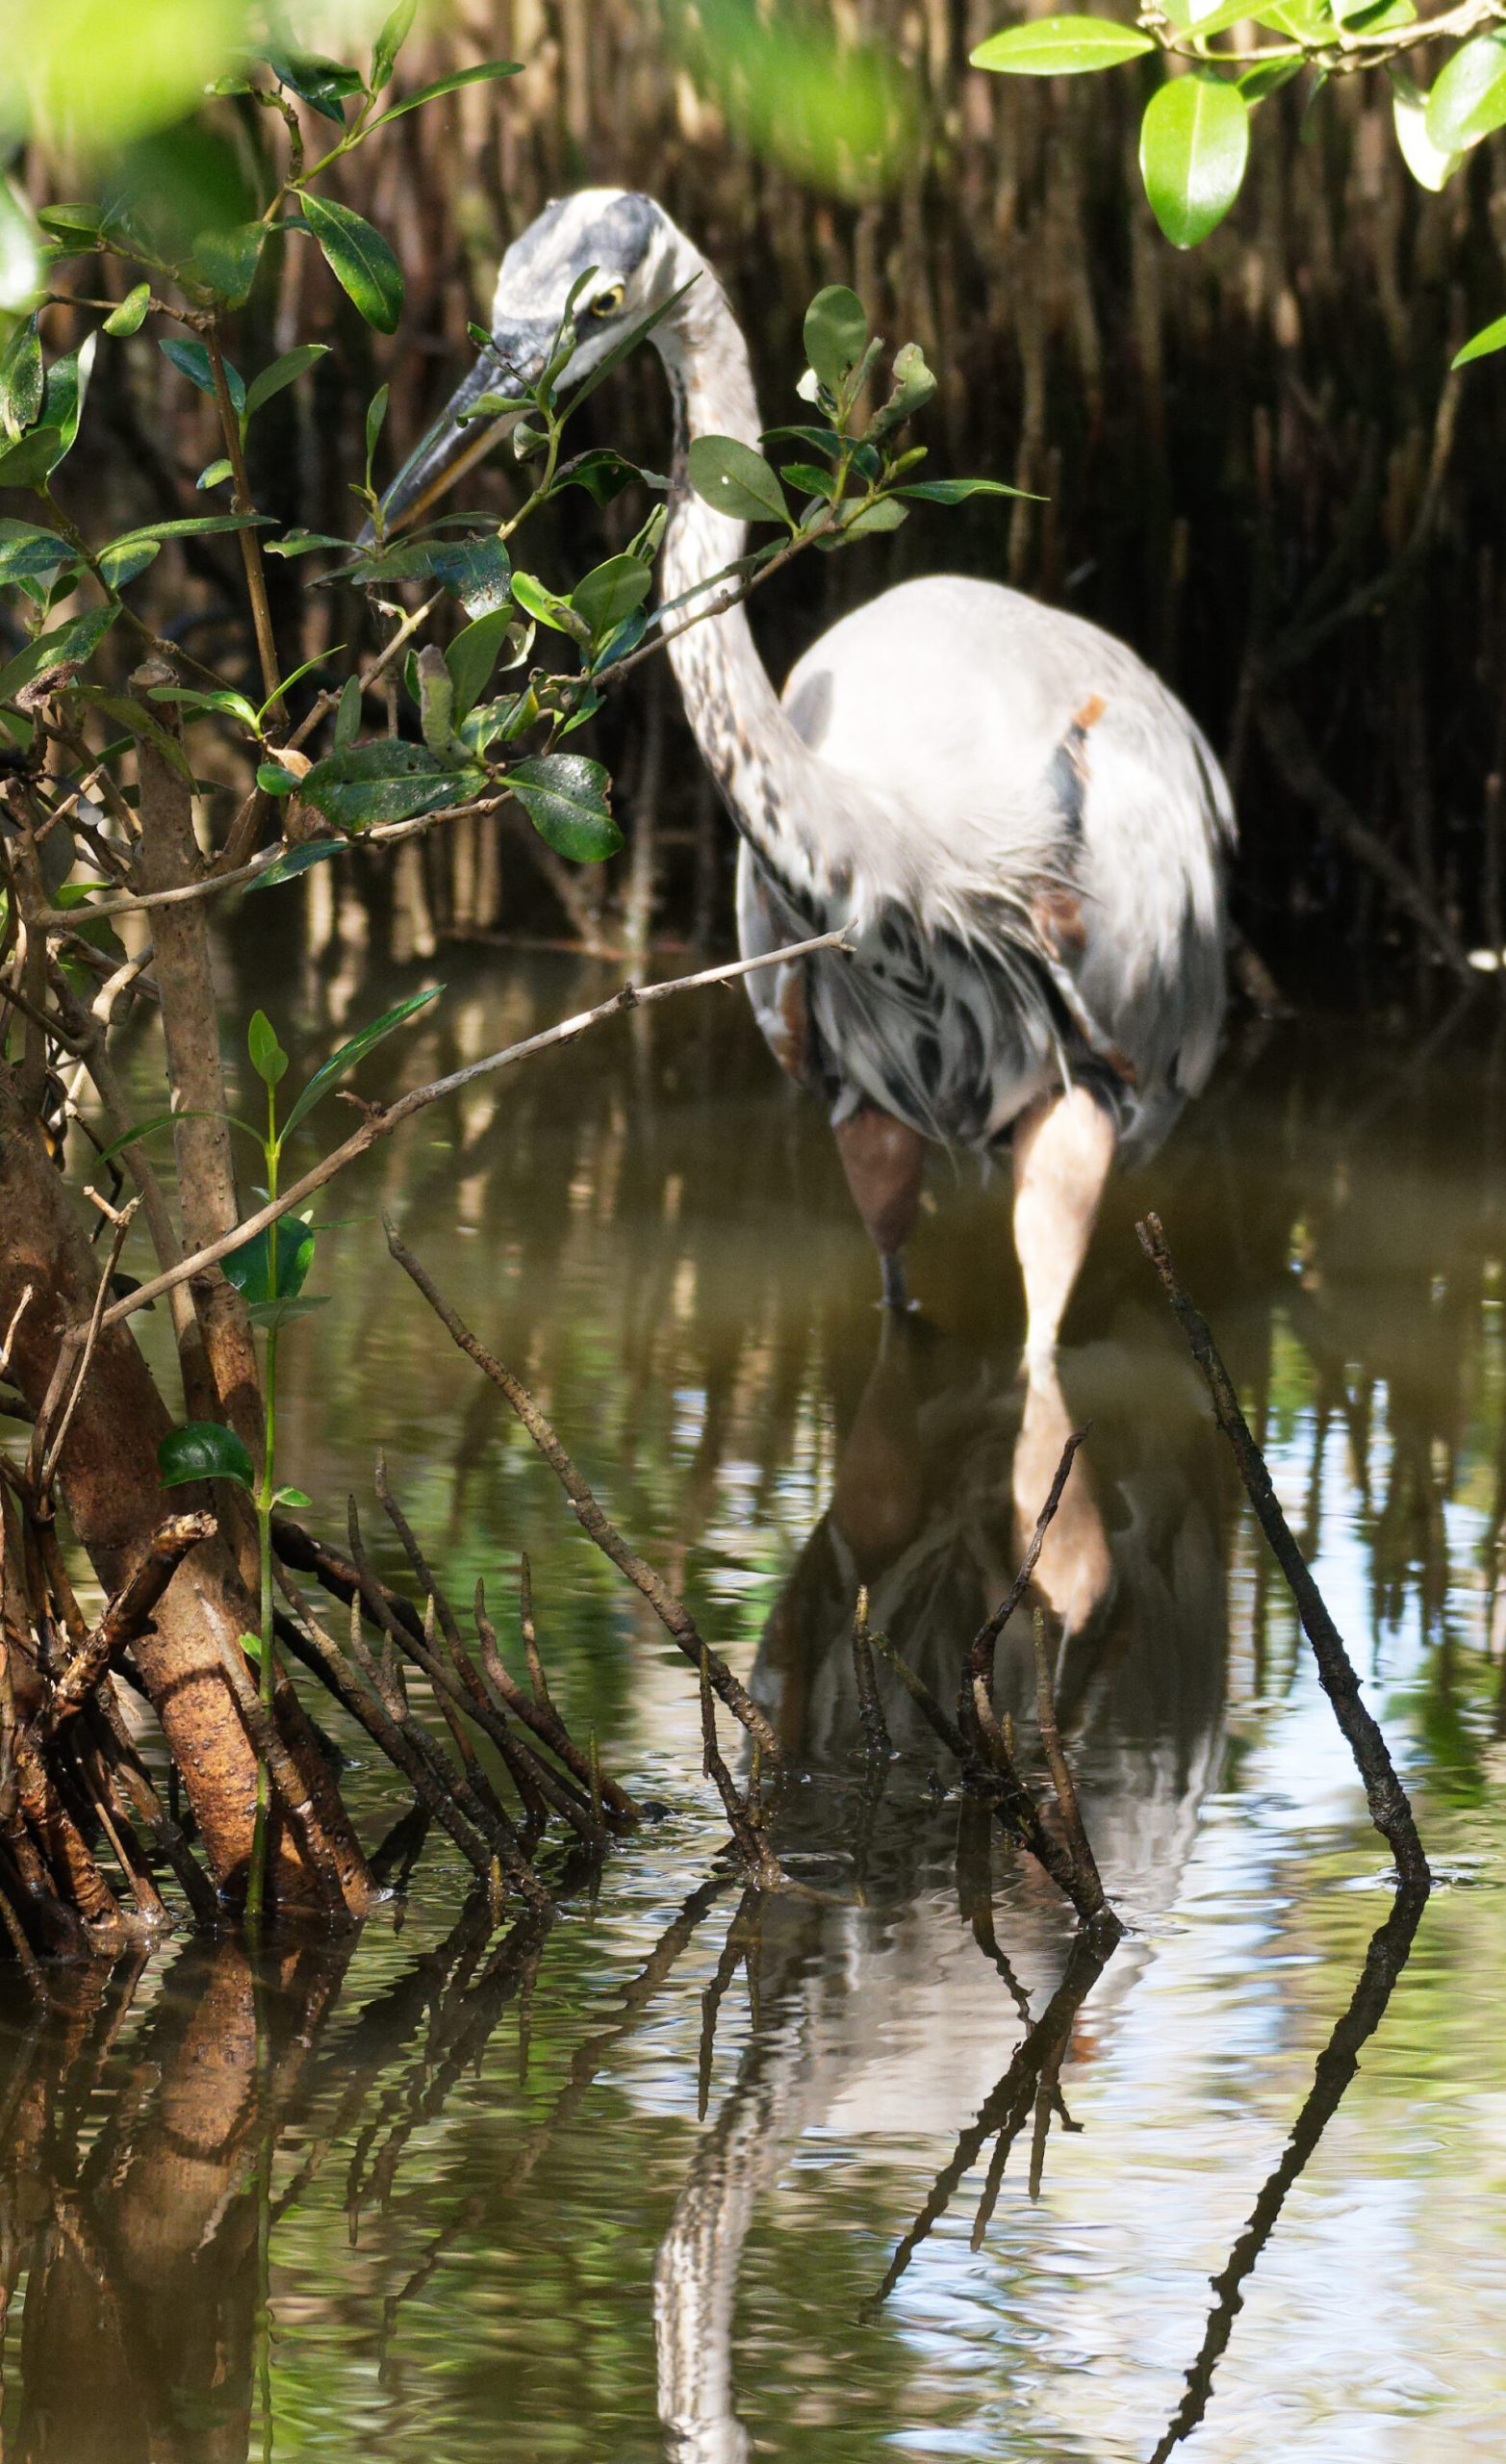 A great blue heron hunts in the shadows under a canopy of black mangroves. (Rick Kelley/Valley Morning Star)